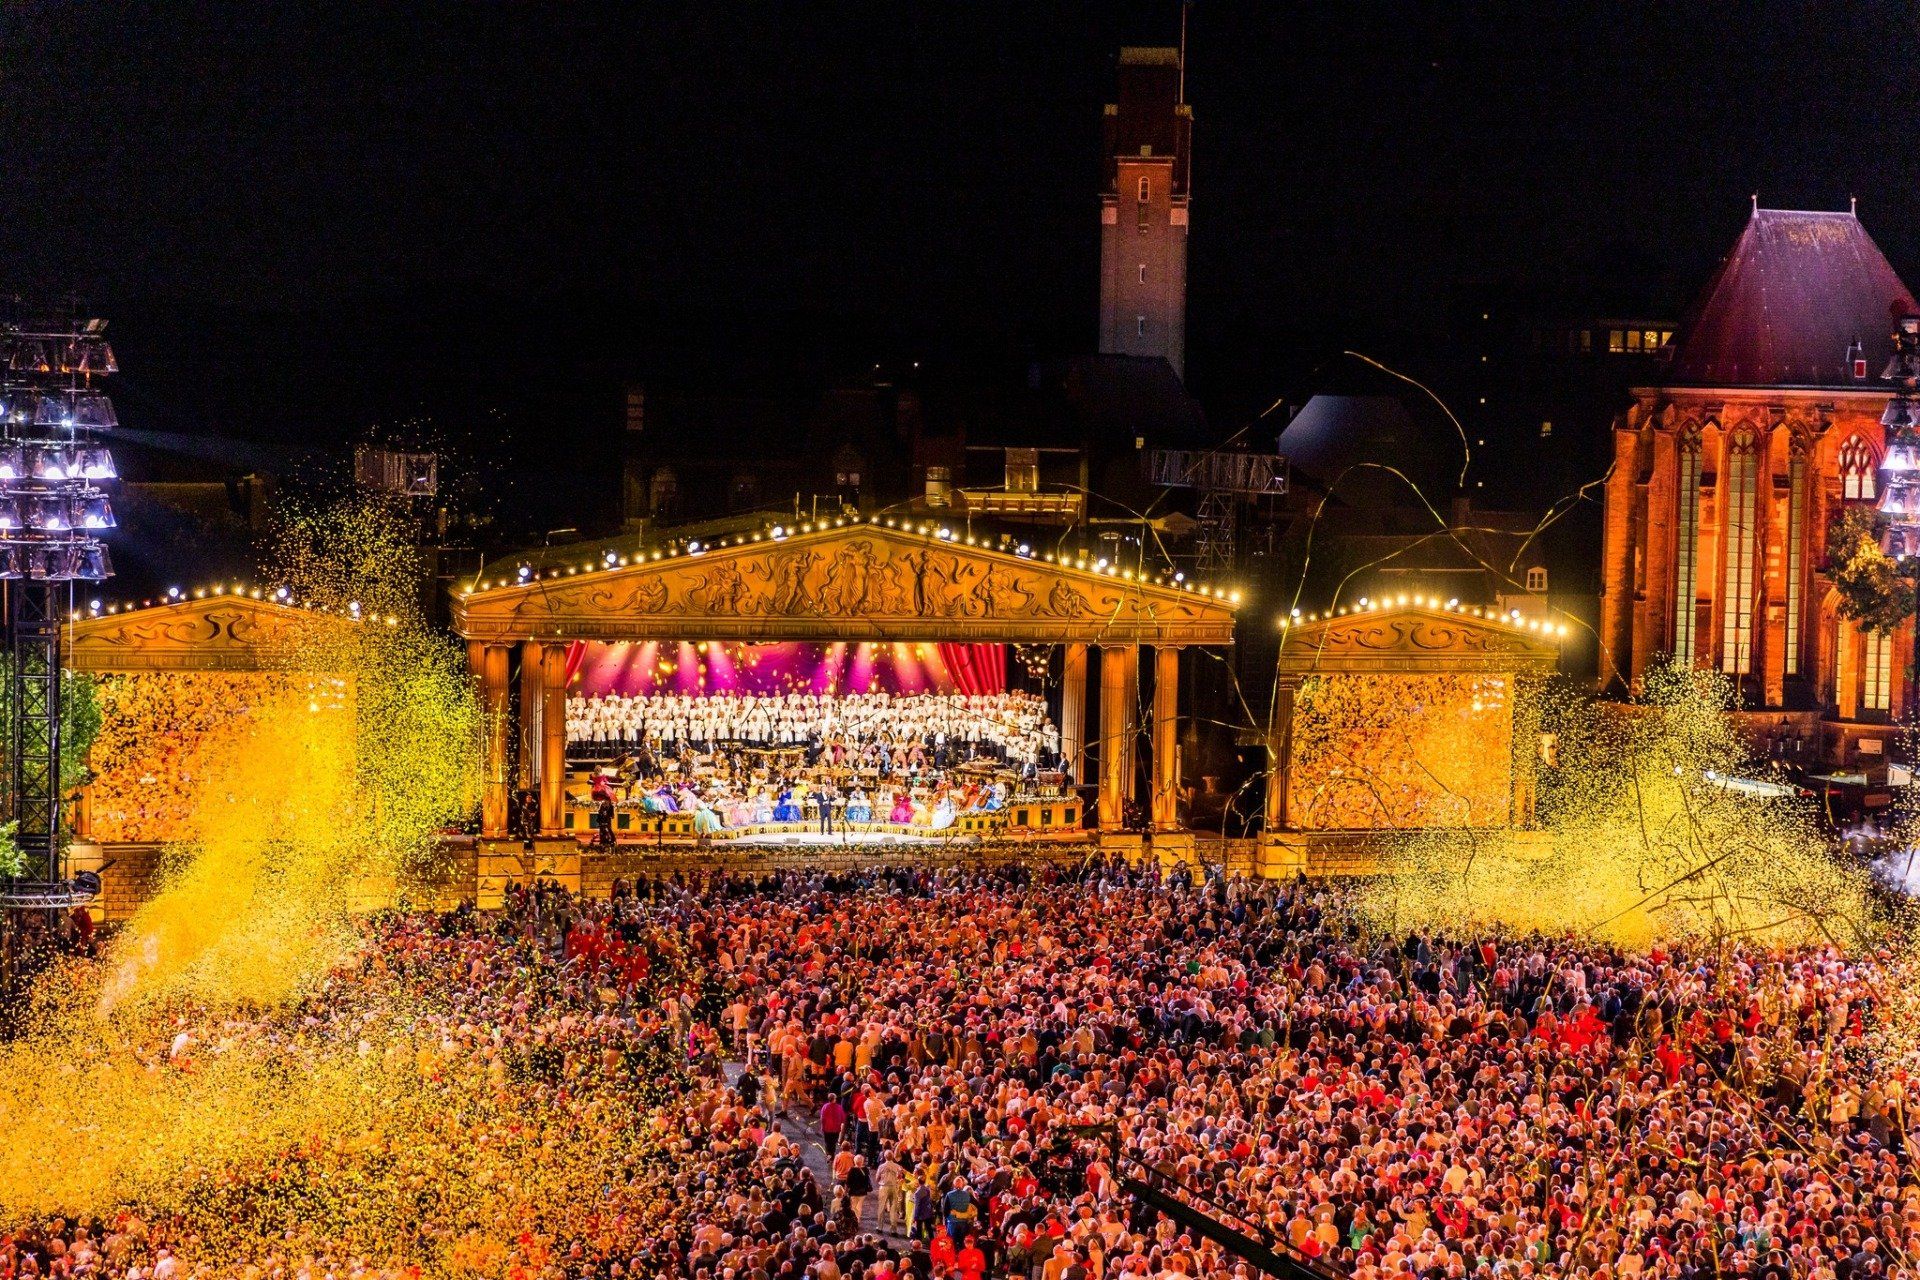 World's Largest Private Orchestra: world record in Maastricht,The Netherlands